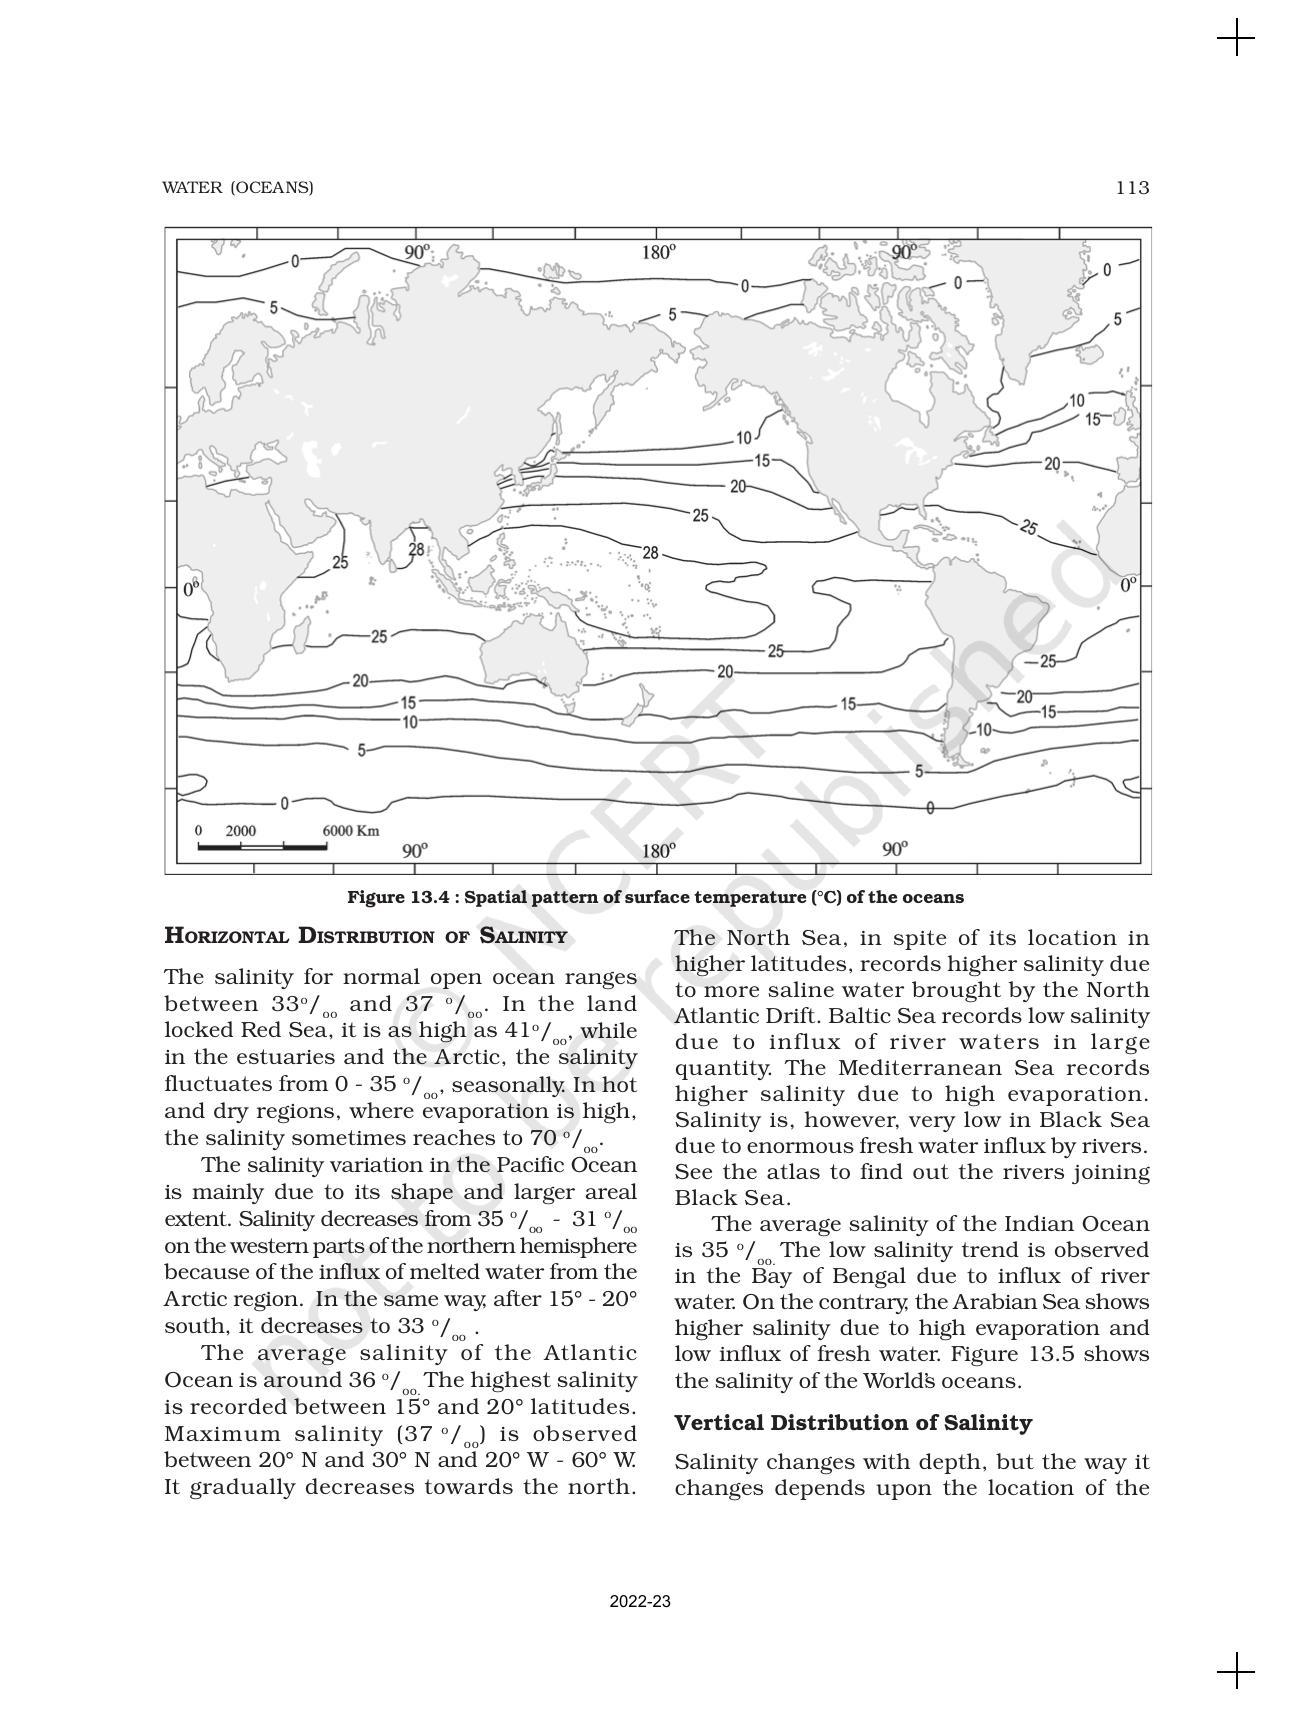 NCERT Book for Class 11 Geography (Part-I) Chapter 13 Water (Oceans) - Page 7